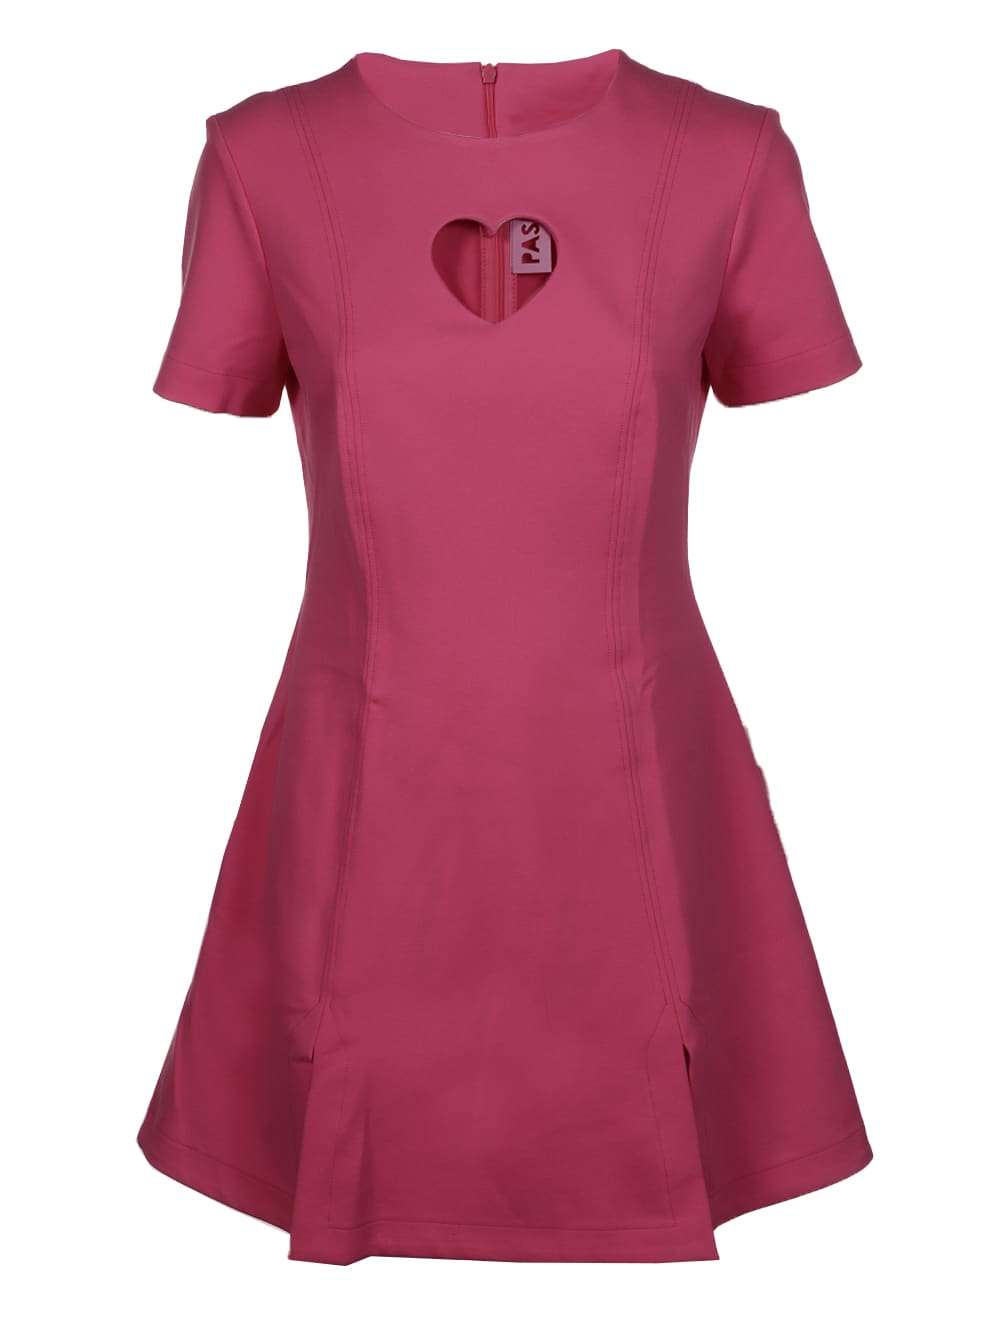 Paskal Short Sleeve Mini Dress With Heart Shaped Cut Out